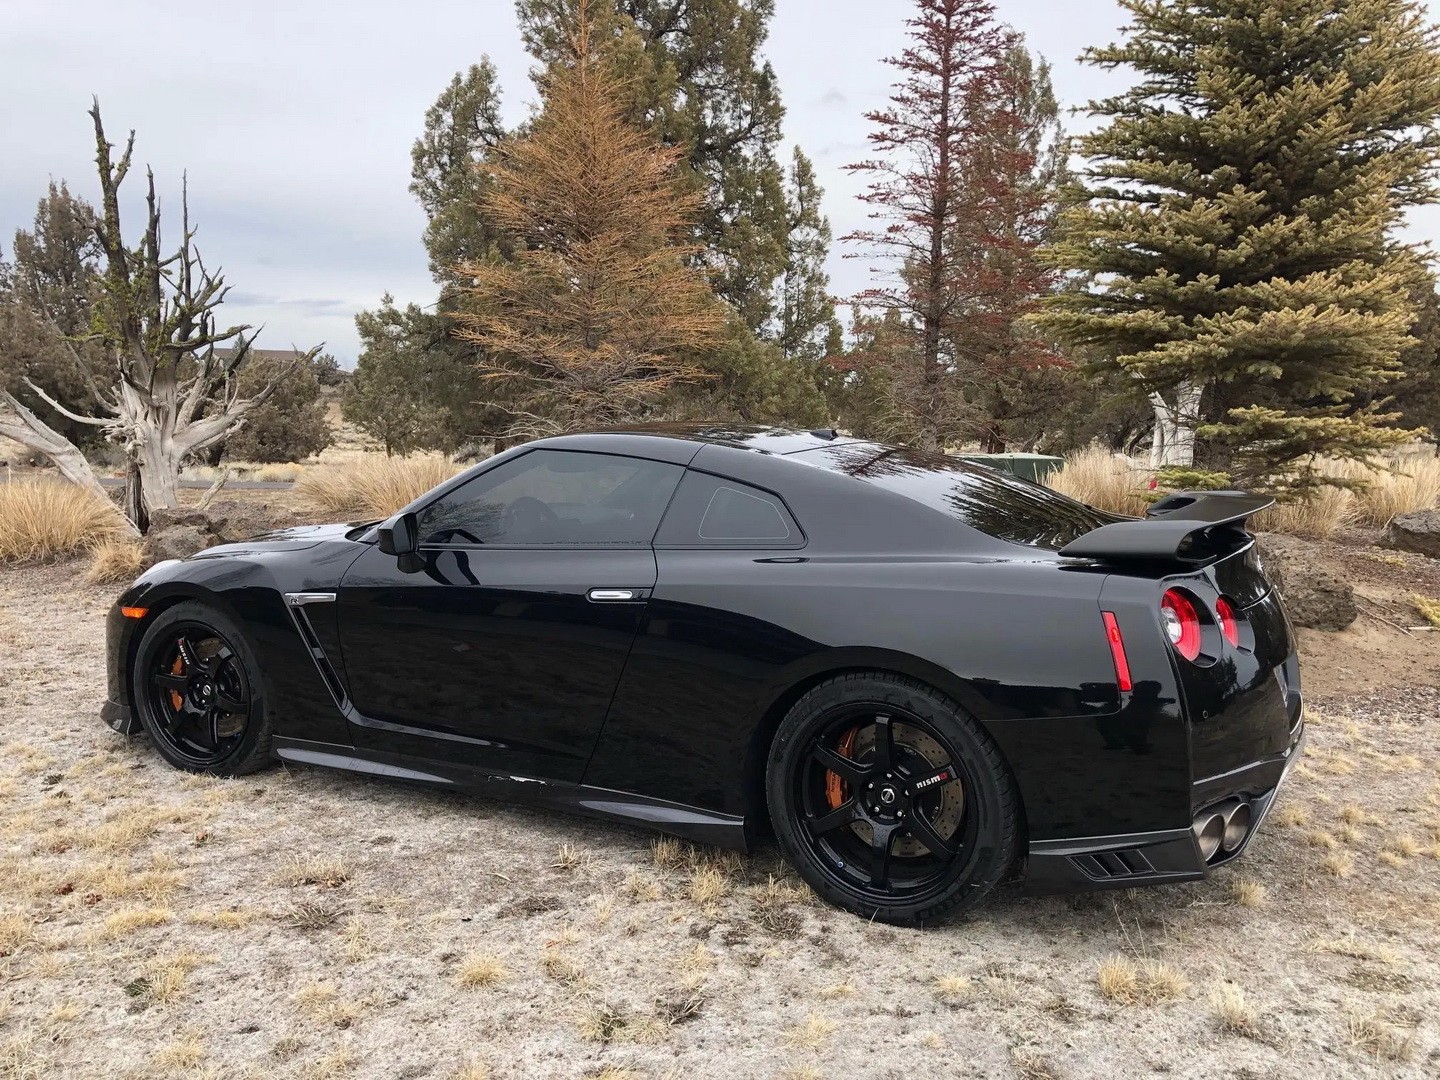 This Jet Black Nissan Gt R Track Edition Is Our Idea Of A Scary Mechagodzilla Autoevolution